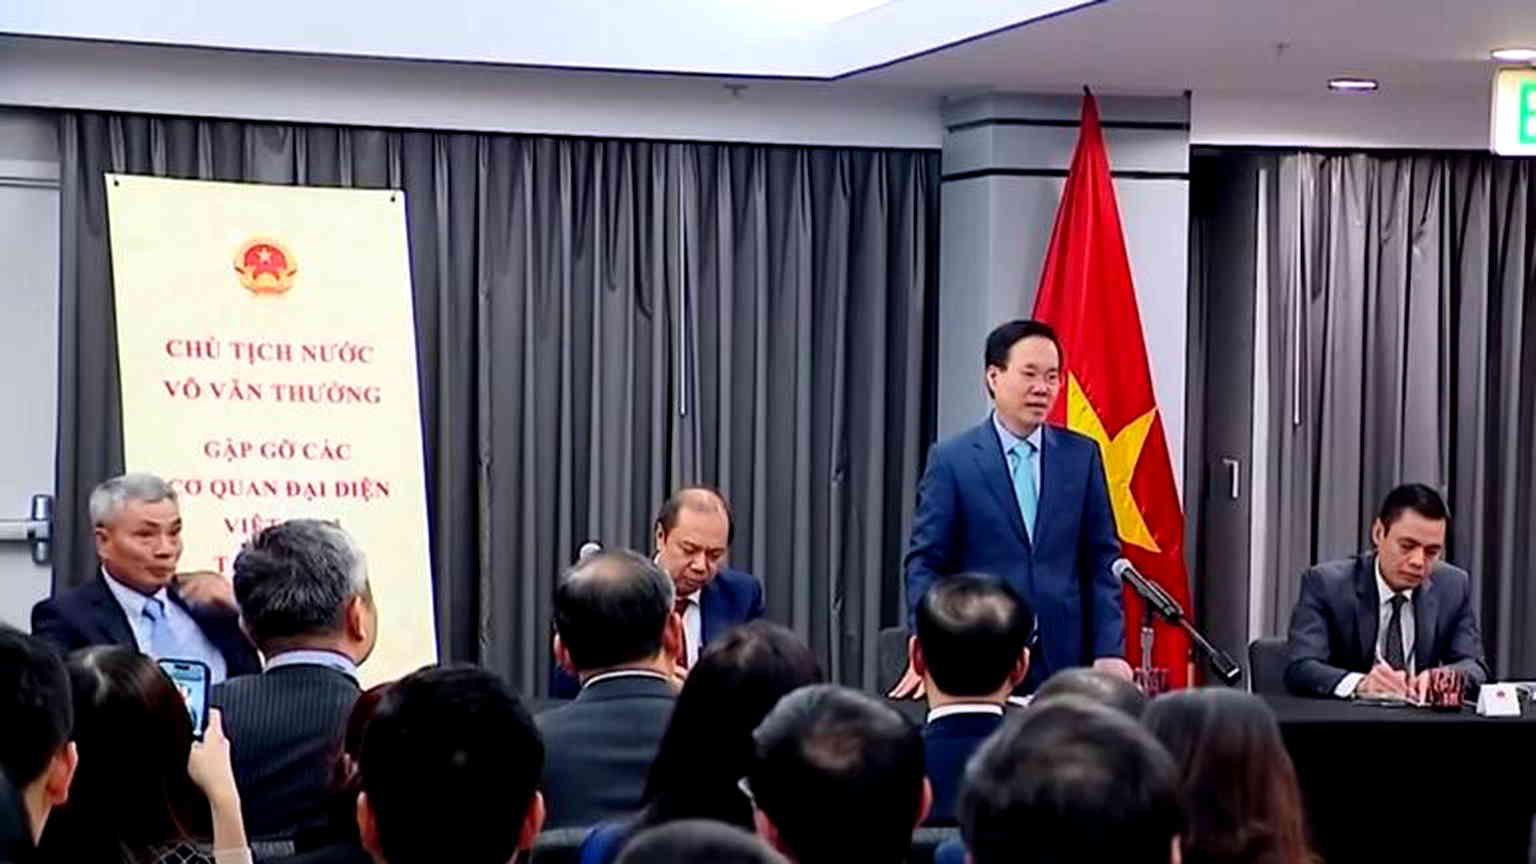 Vietnam president meets with Vietnamese community in US during APEC